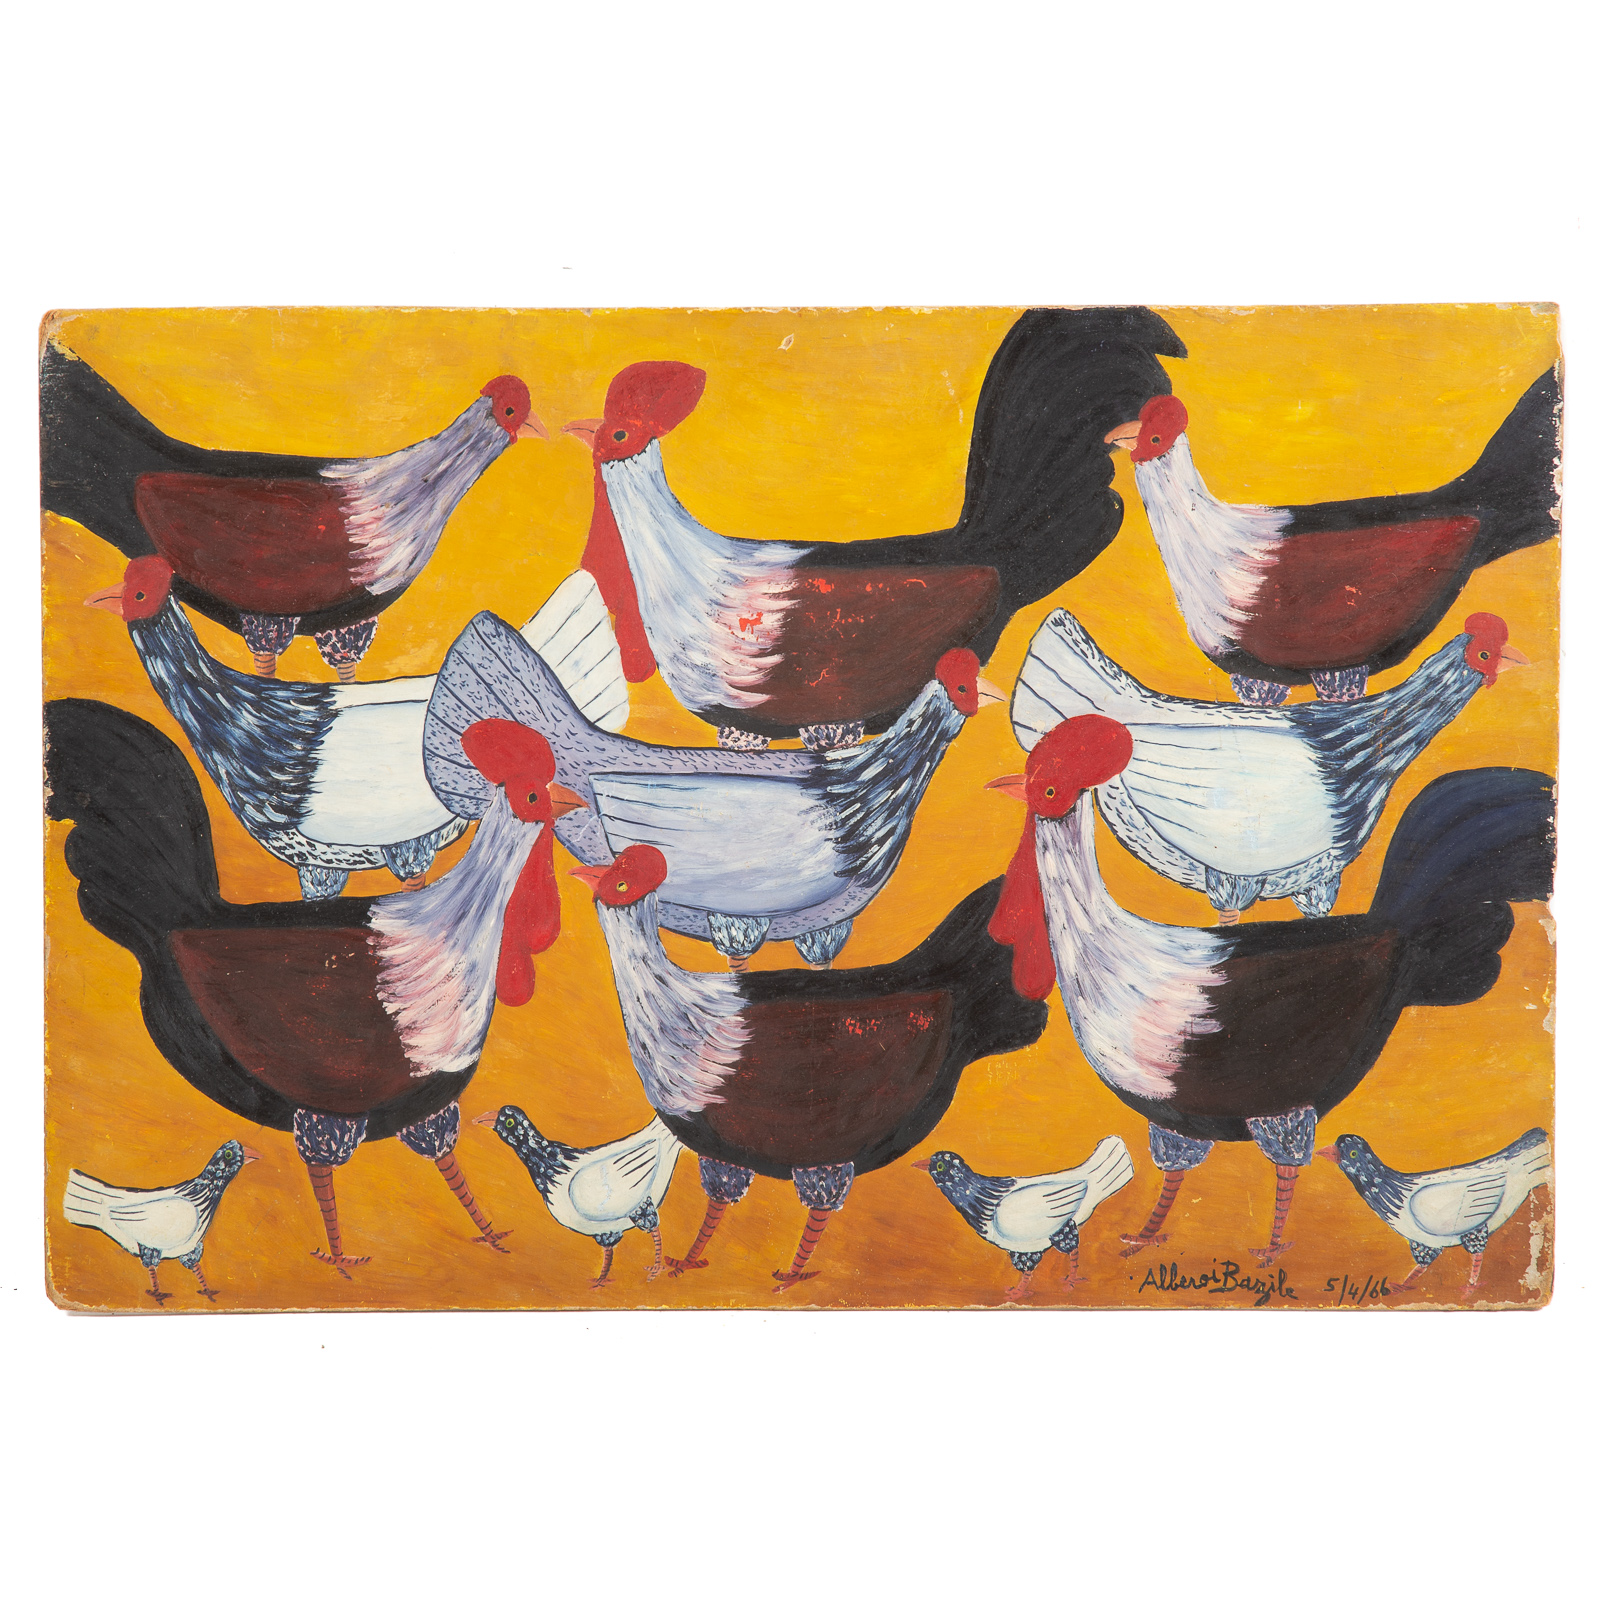 ALBEROI BAZILE. ROOSTERS AND CHICKS,